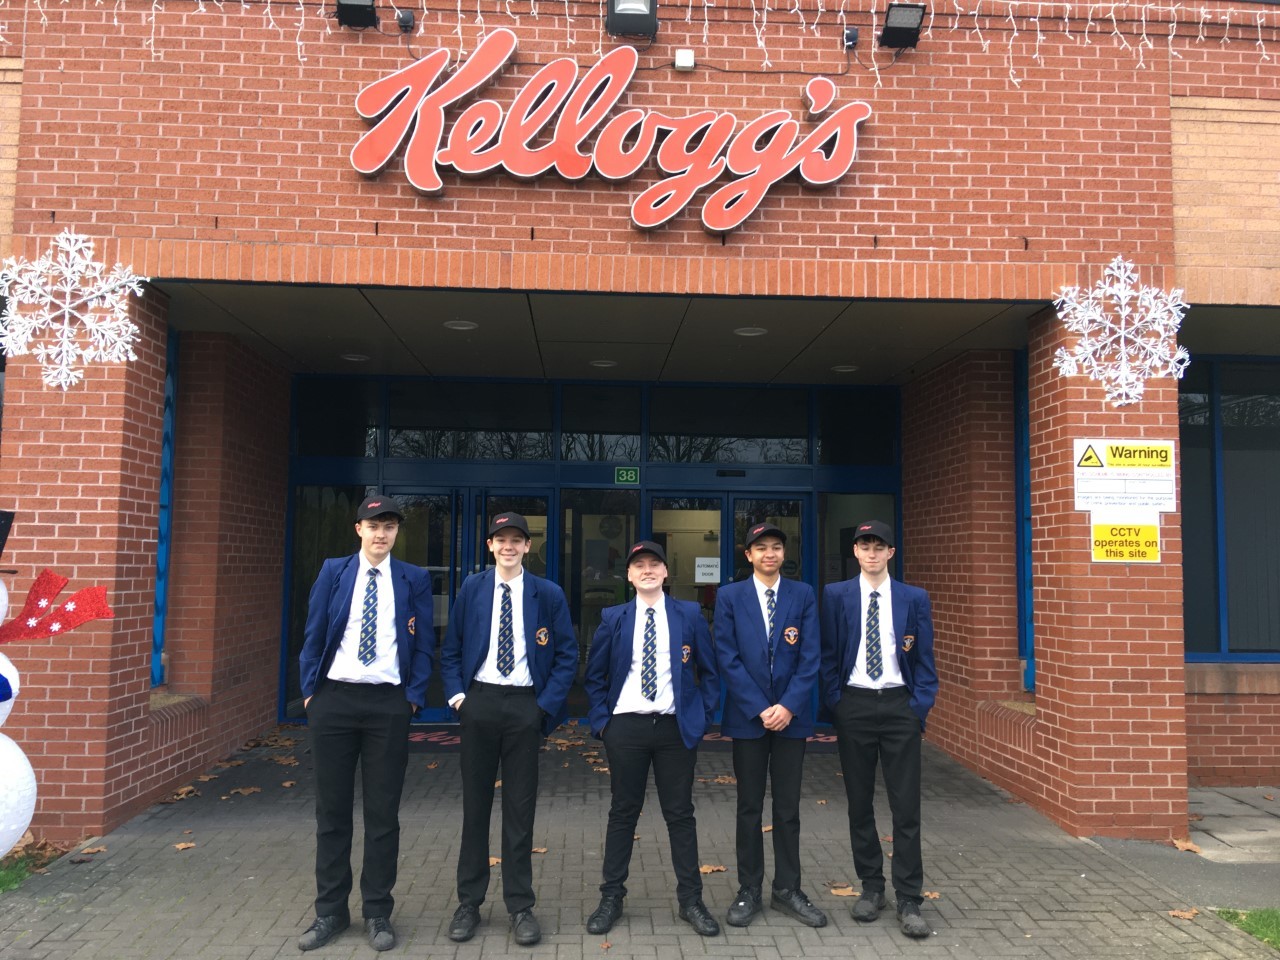 Year 11 design and technology, and engineering students Oliver Evans, Joe Brown, Archie Davies, Jannie Gregory and Lewis Hand visited the Kellogg’s factory in Wrexham.